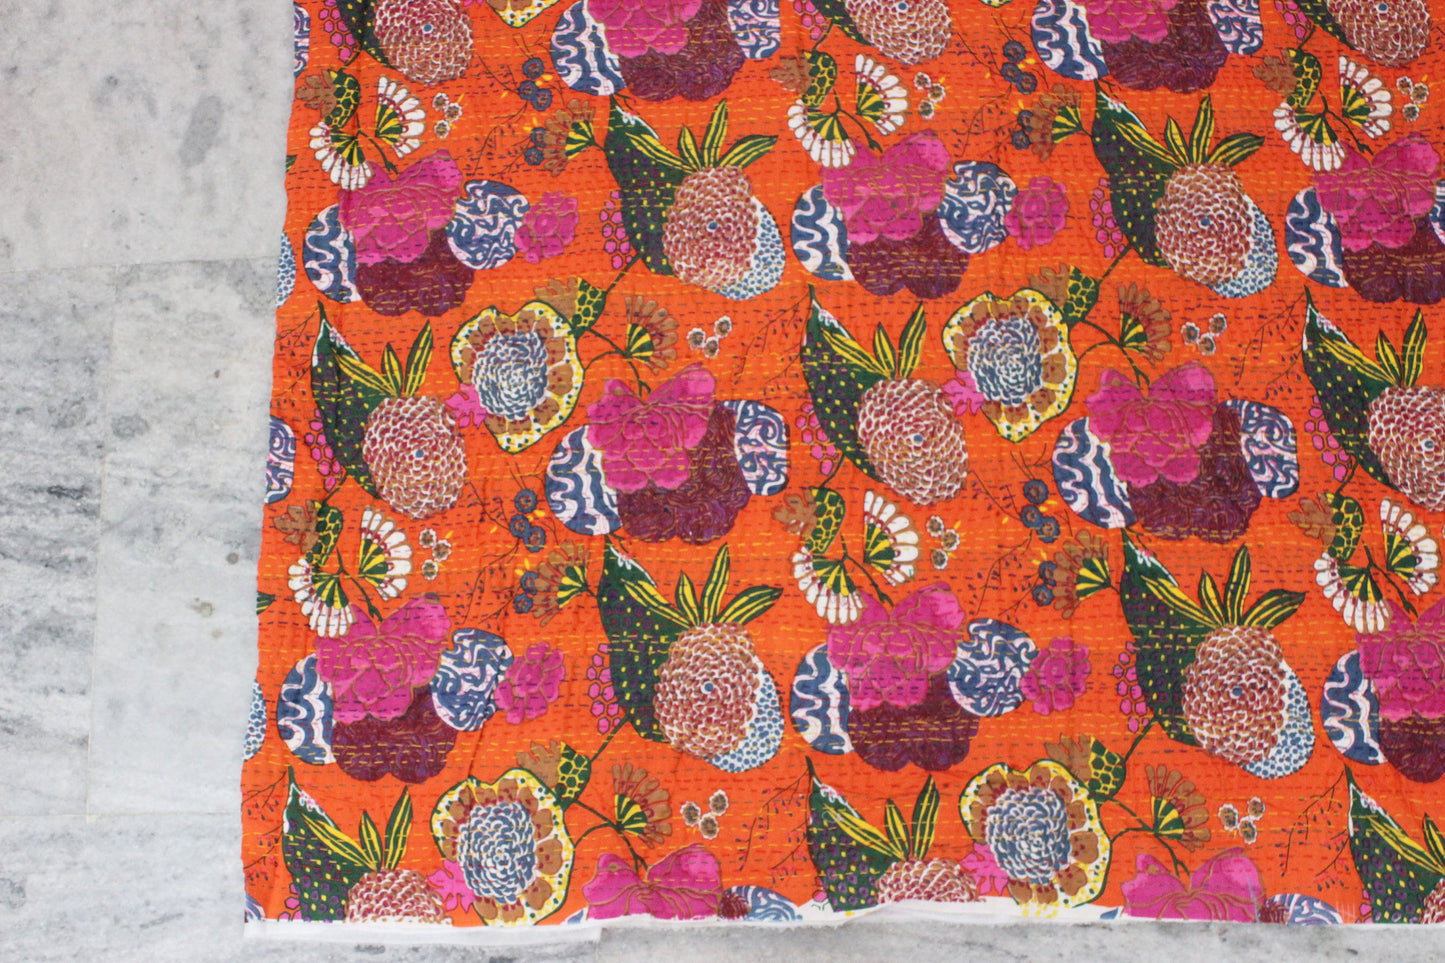 Orange Bohemian Fabric by the yard Embroidered Printed Home Decor Fabric Floral Indian Fabric Boho Indian Textile Fabric Kantha Fabrics